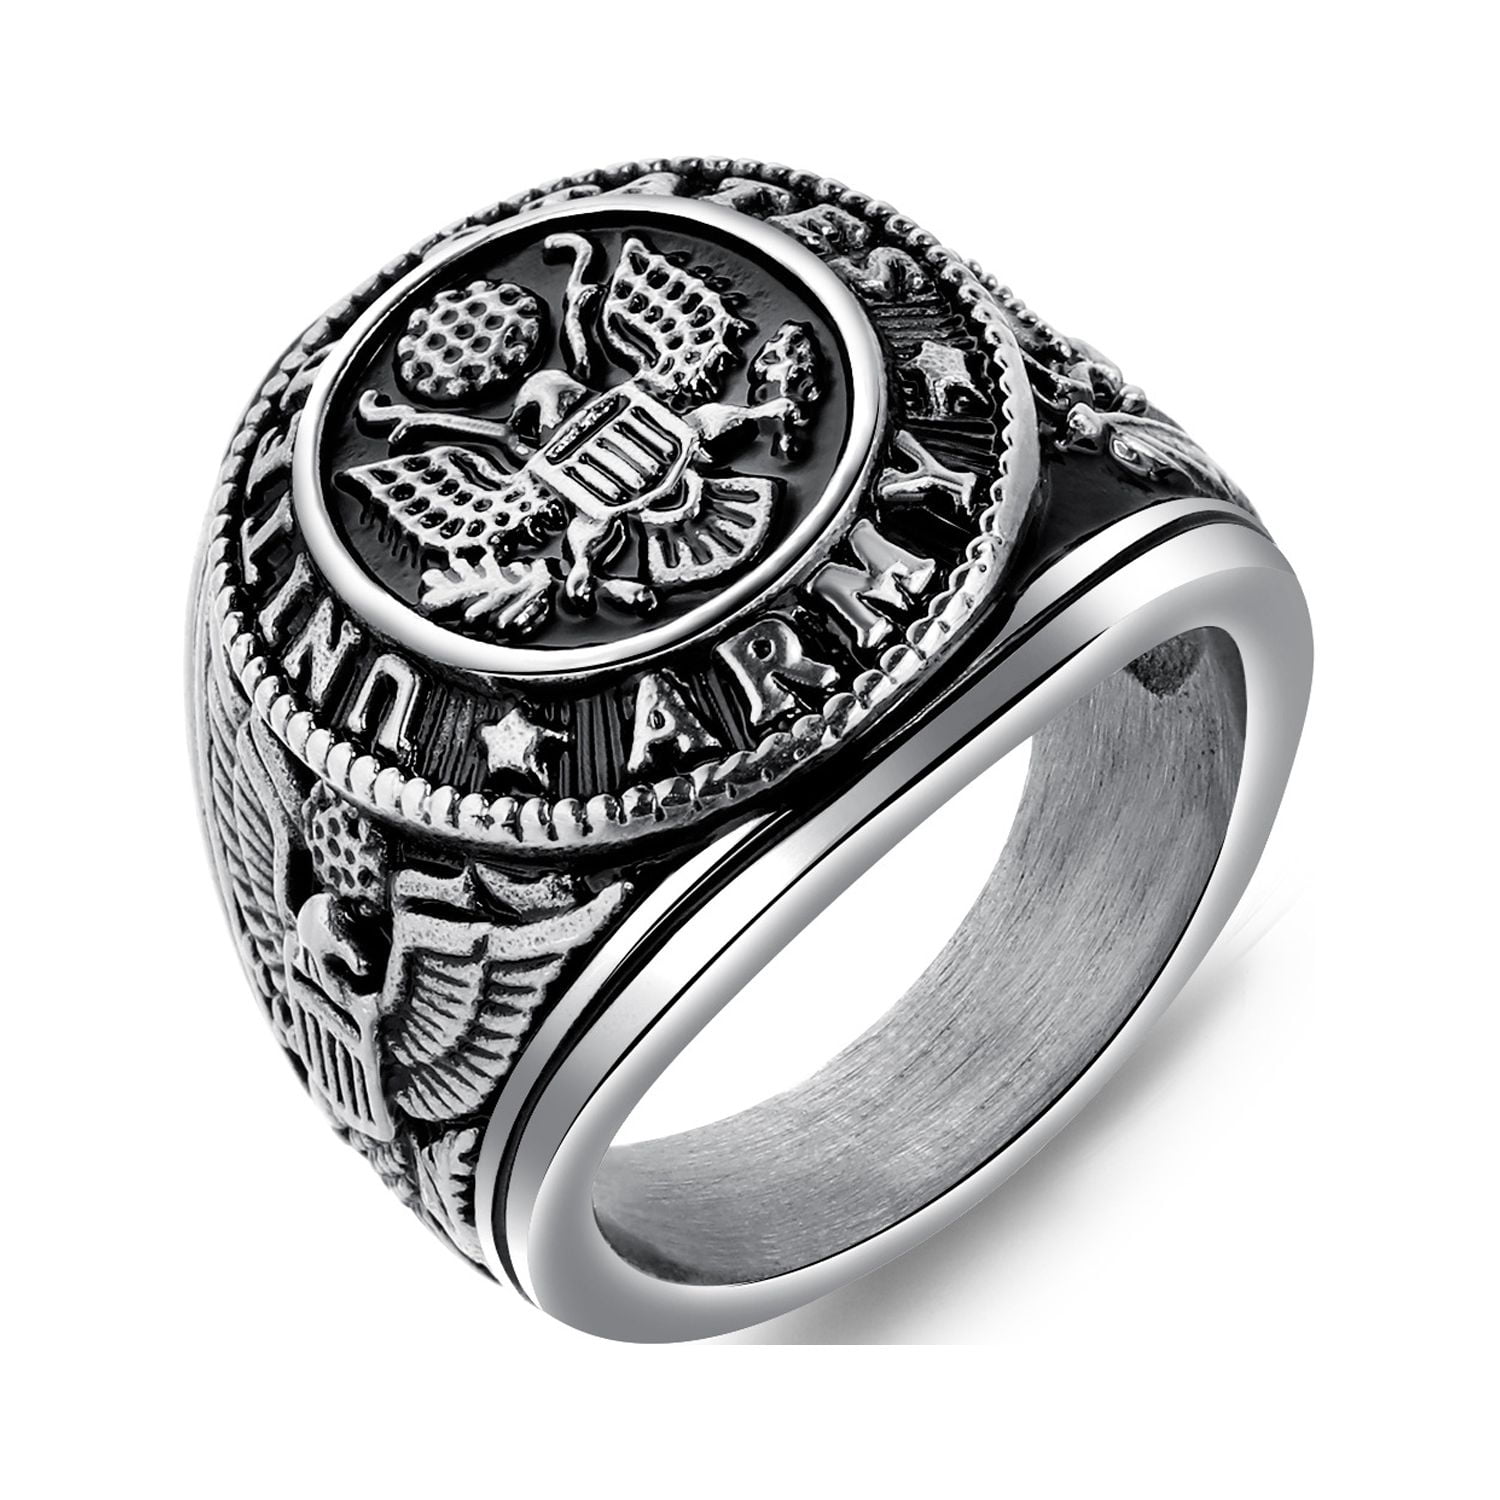 JAJAFOOK Titanium Steel Army Military Ring Eagle Medal Rings for Men ...